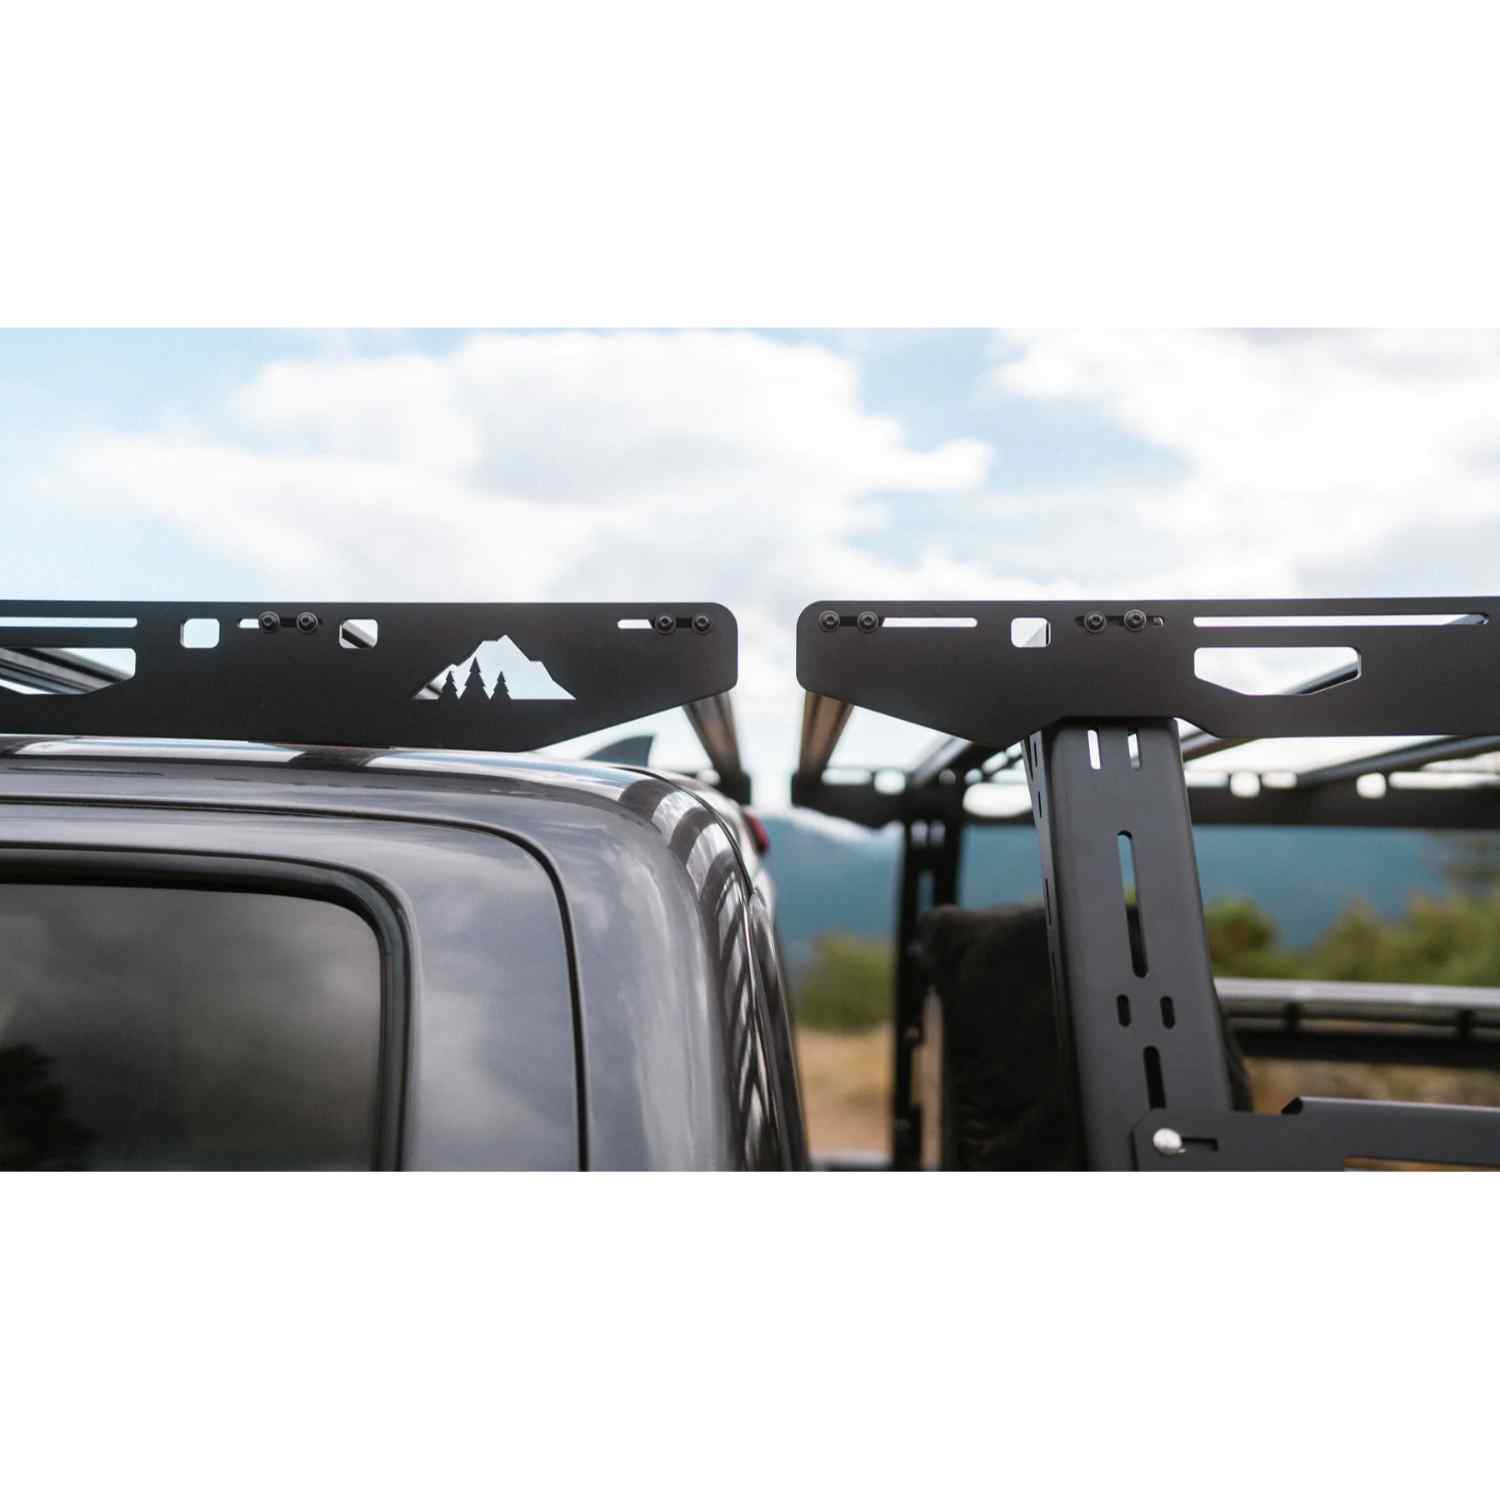 Sherpa Rack-Height PAK System Bed Rack Closed View